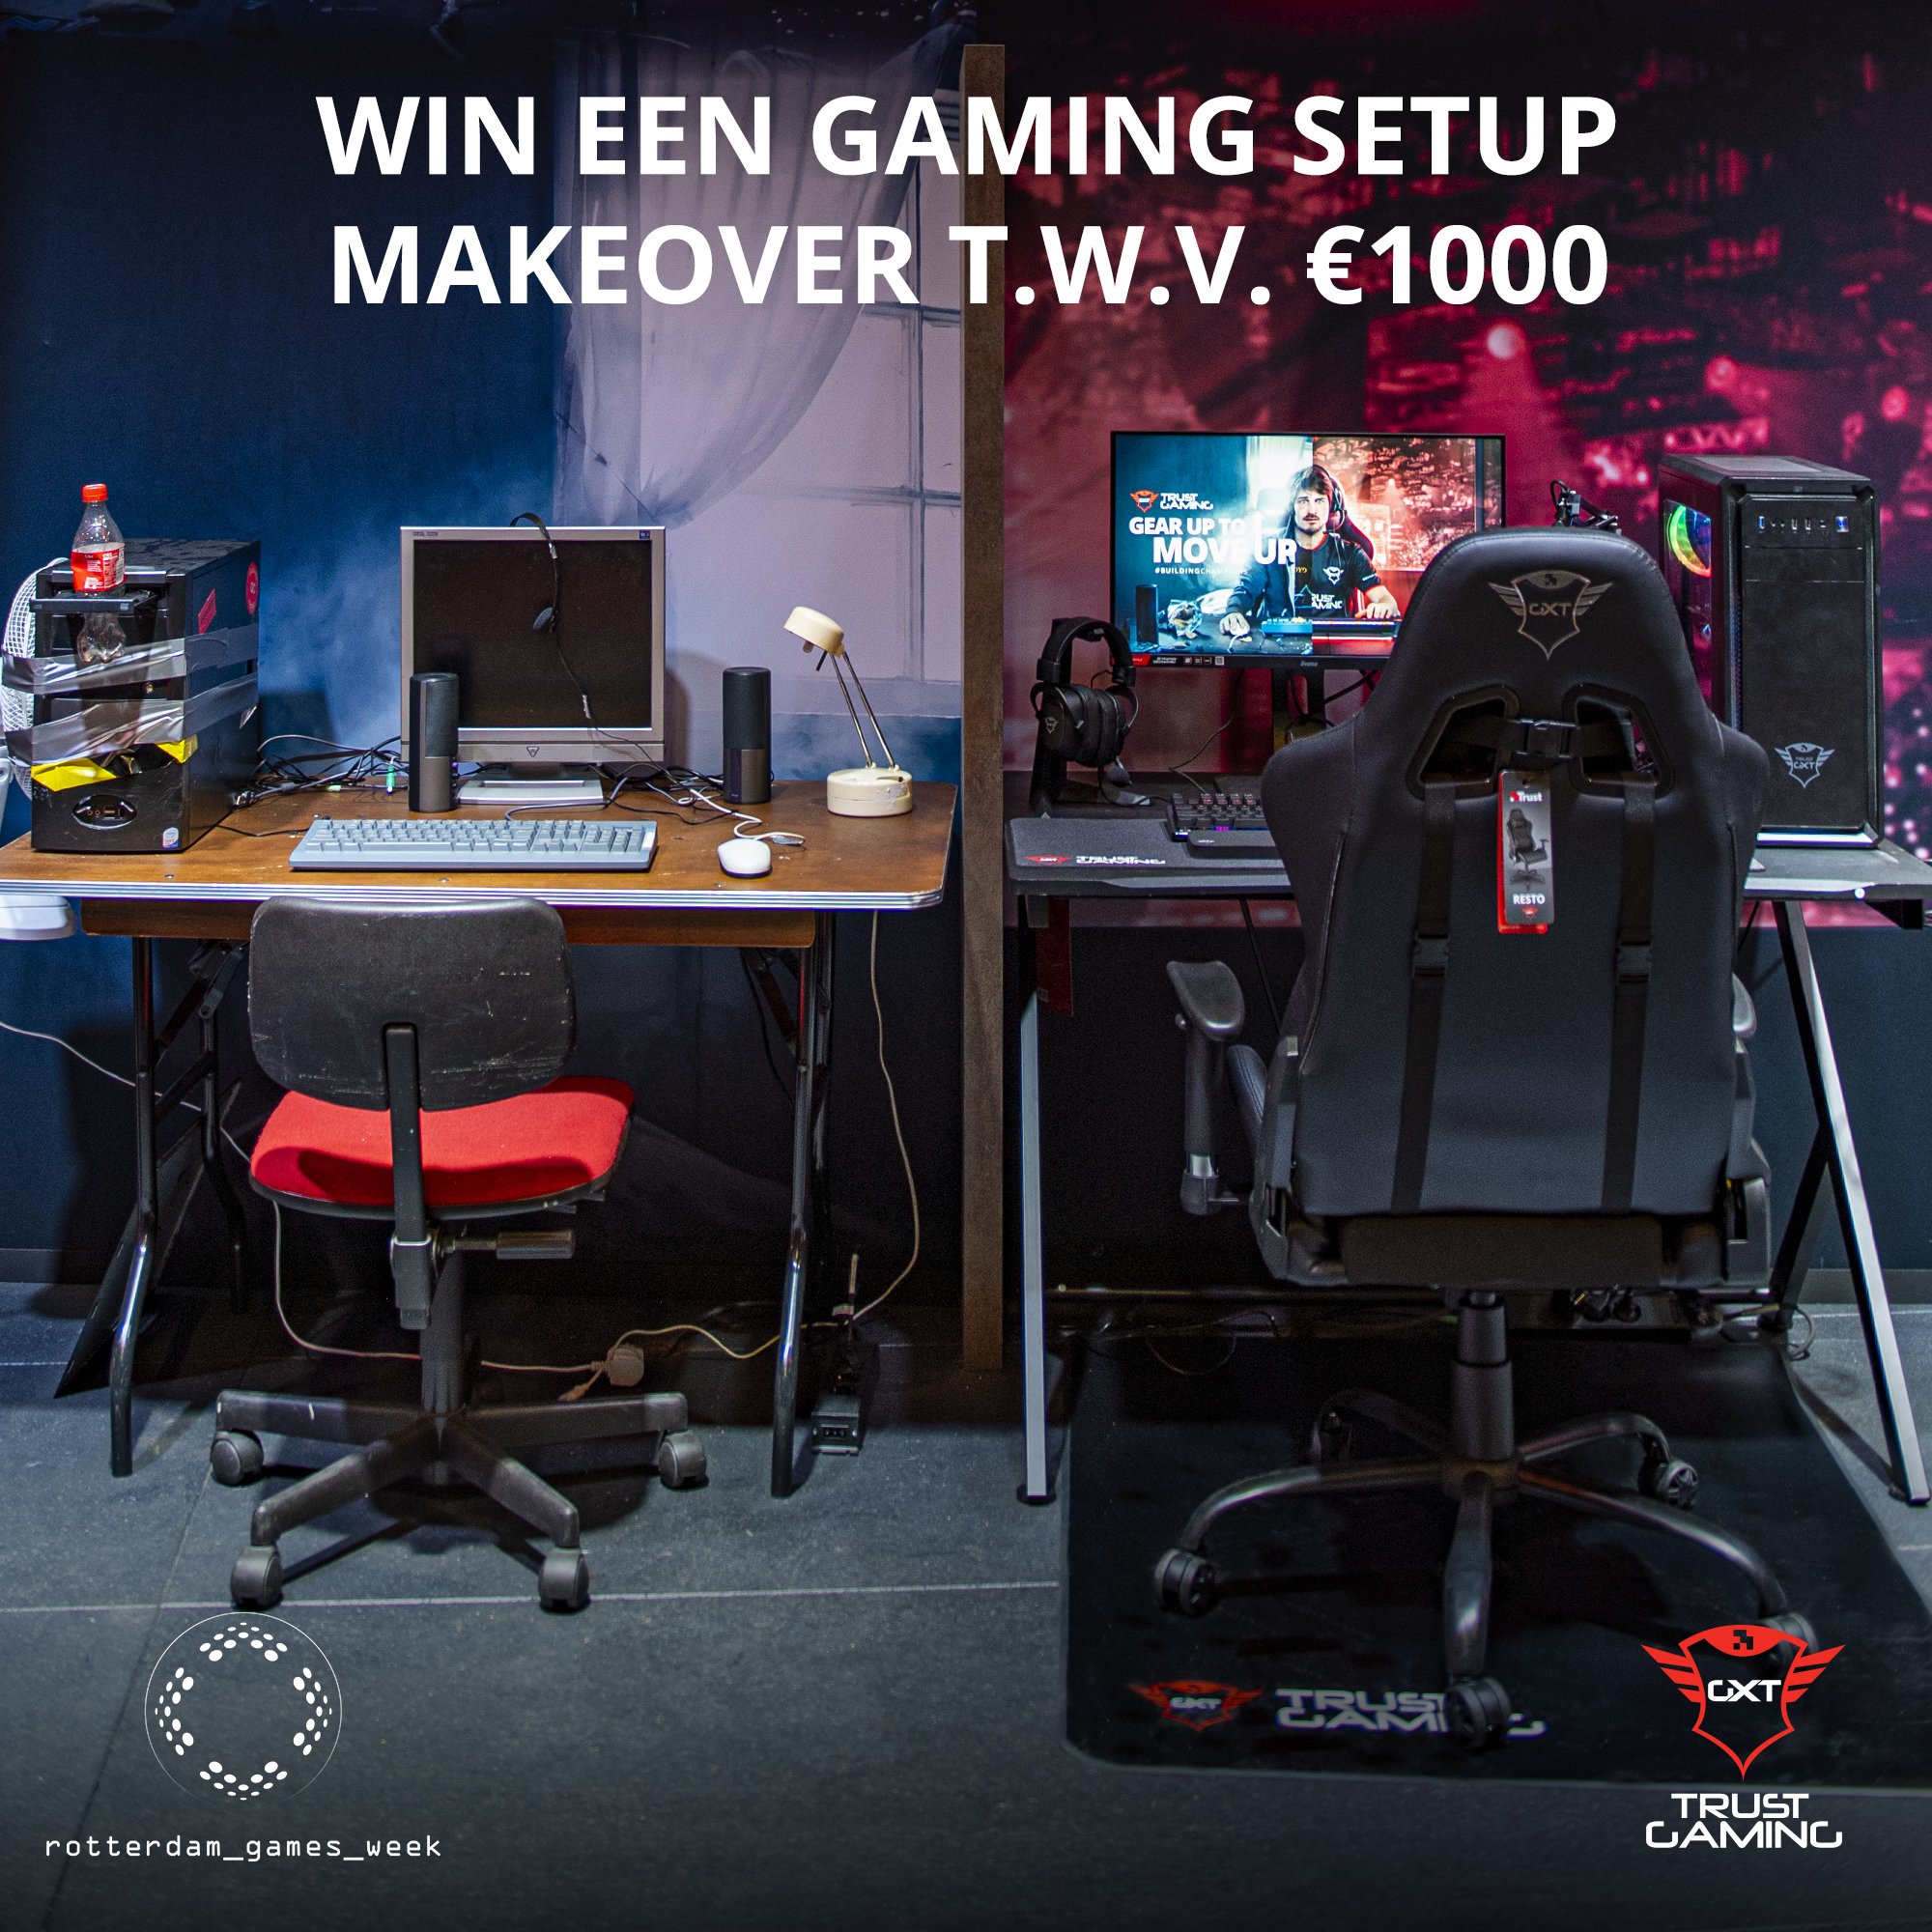 Trust Gaming Are You In Need Of A Setup Upgrade Come To Our Booth Rtmgamesweek And Follow The Steps For A Chance To Win Trust Gaming Products Worth Of 1000